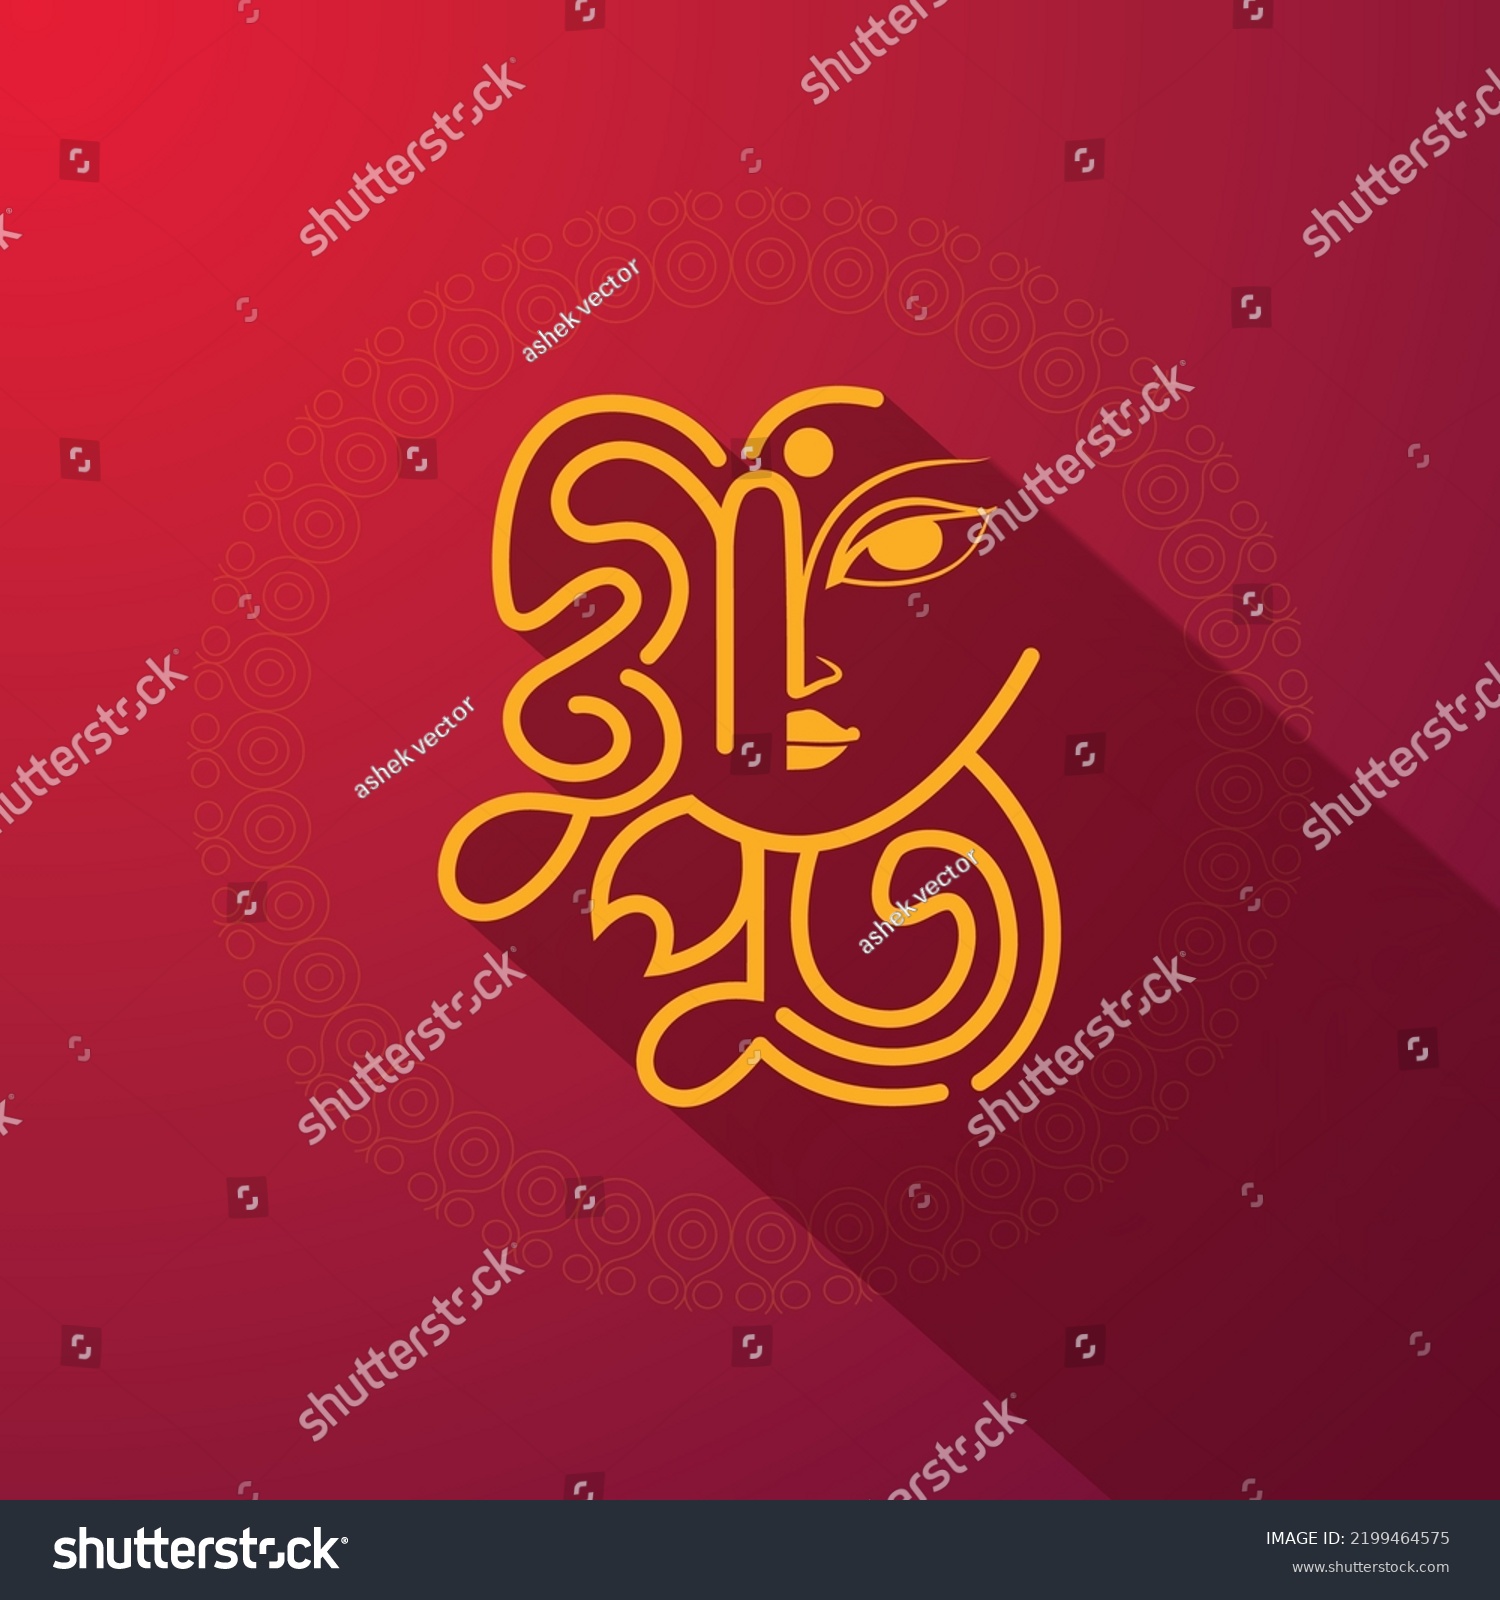 SVG of Happy Durga Puja greeting card Bangla typography template design. Durga Puja lettering design on red color beautiful mandala background to celebrate annual Hindu festival holiday svg